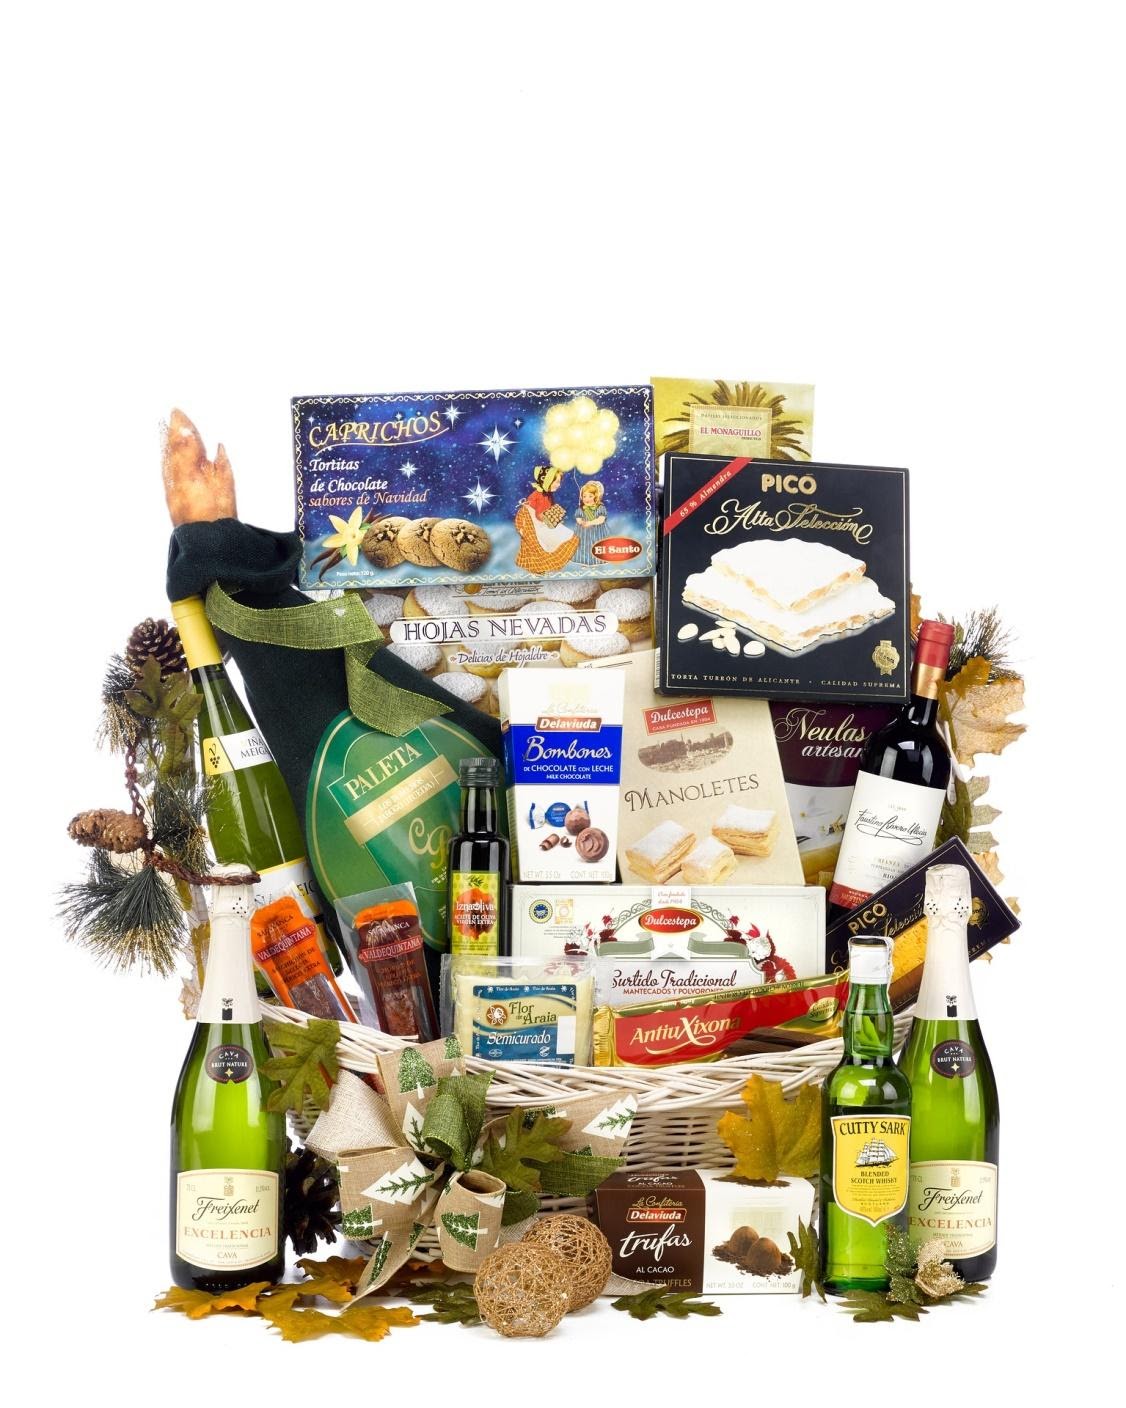 5 Best Hamper Ideas for Every Occasion